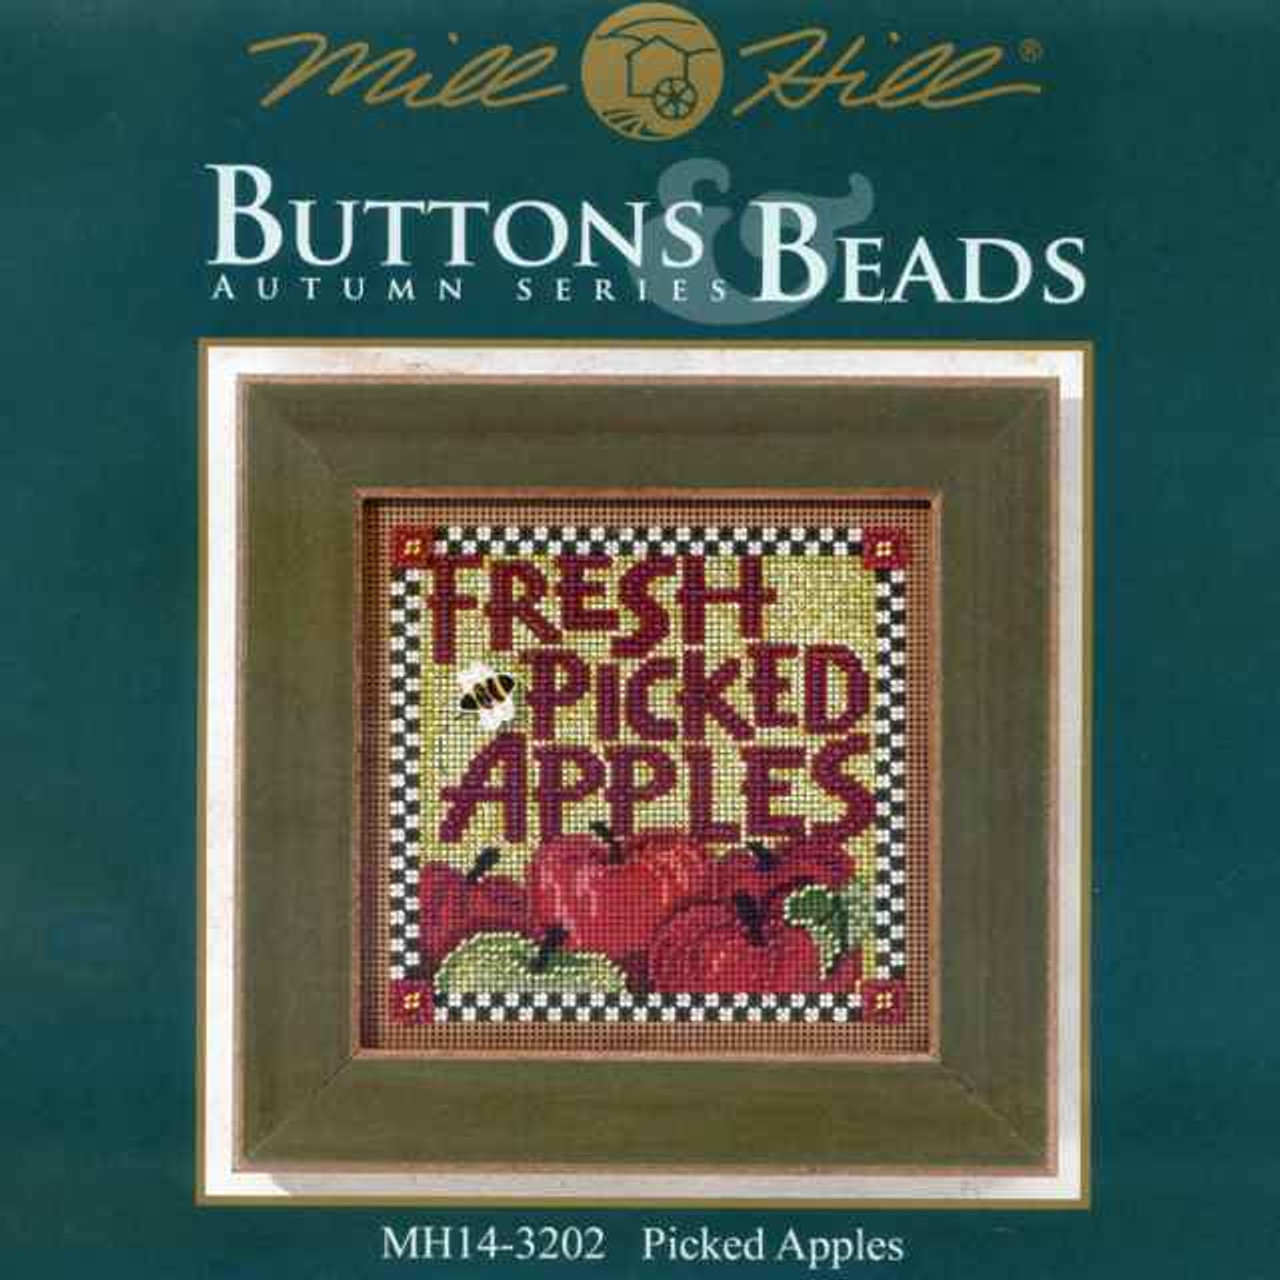 Picked Apples Cross Stitch Kit Mill Hill 2013 Buttons & Beads Autumn